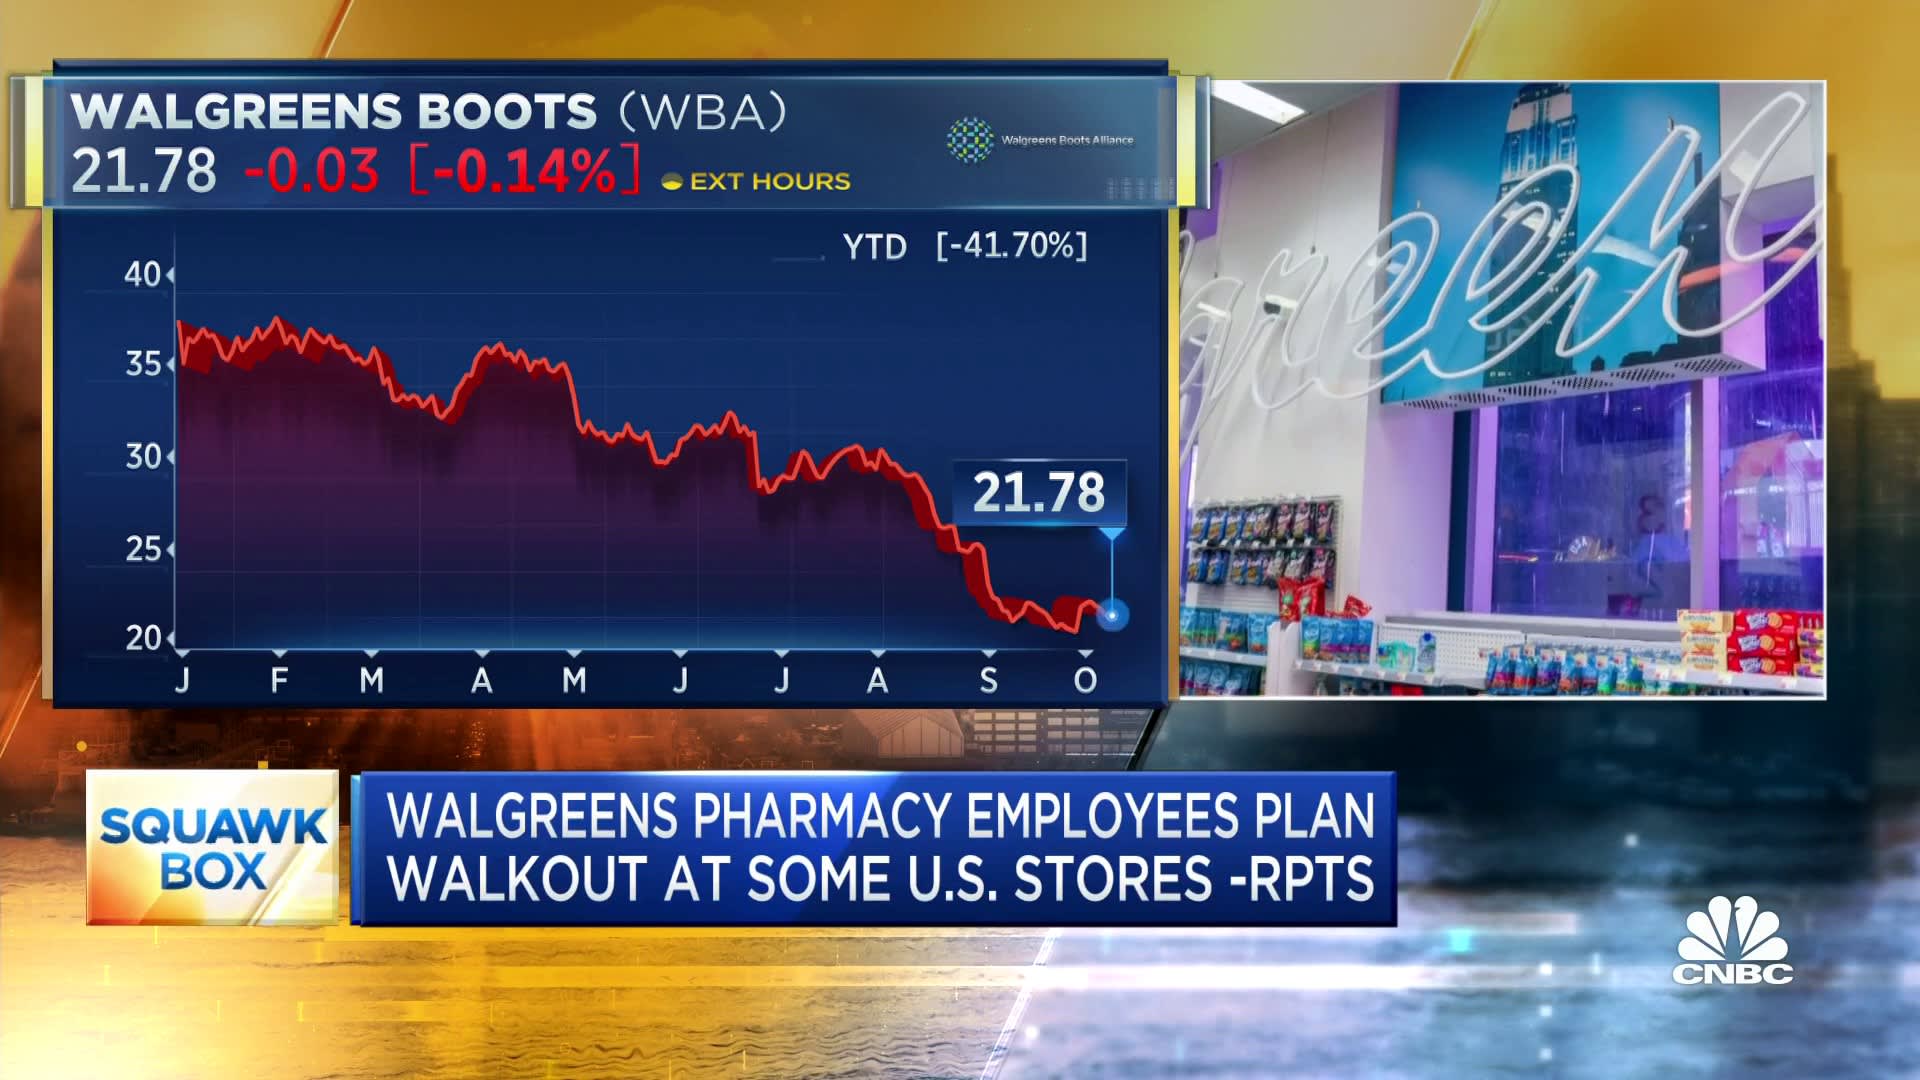 Walgreens pharmacy employees plan walkout at some U.S. stores: Reports